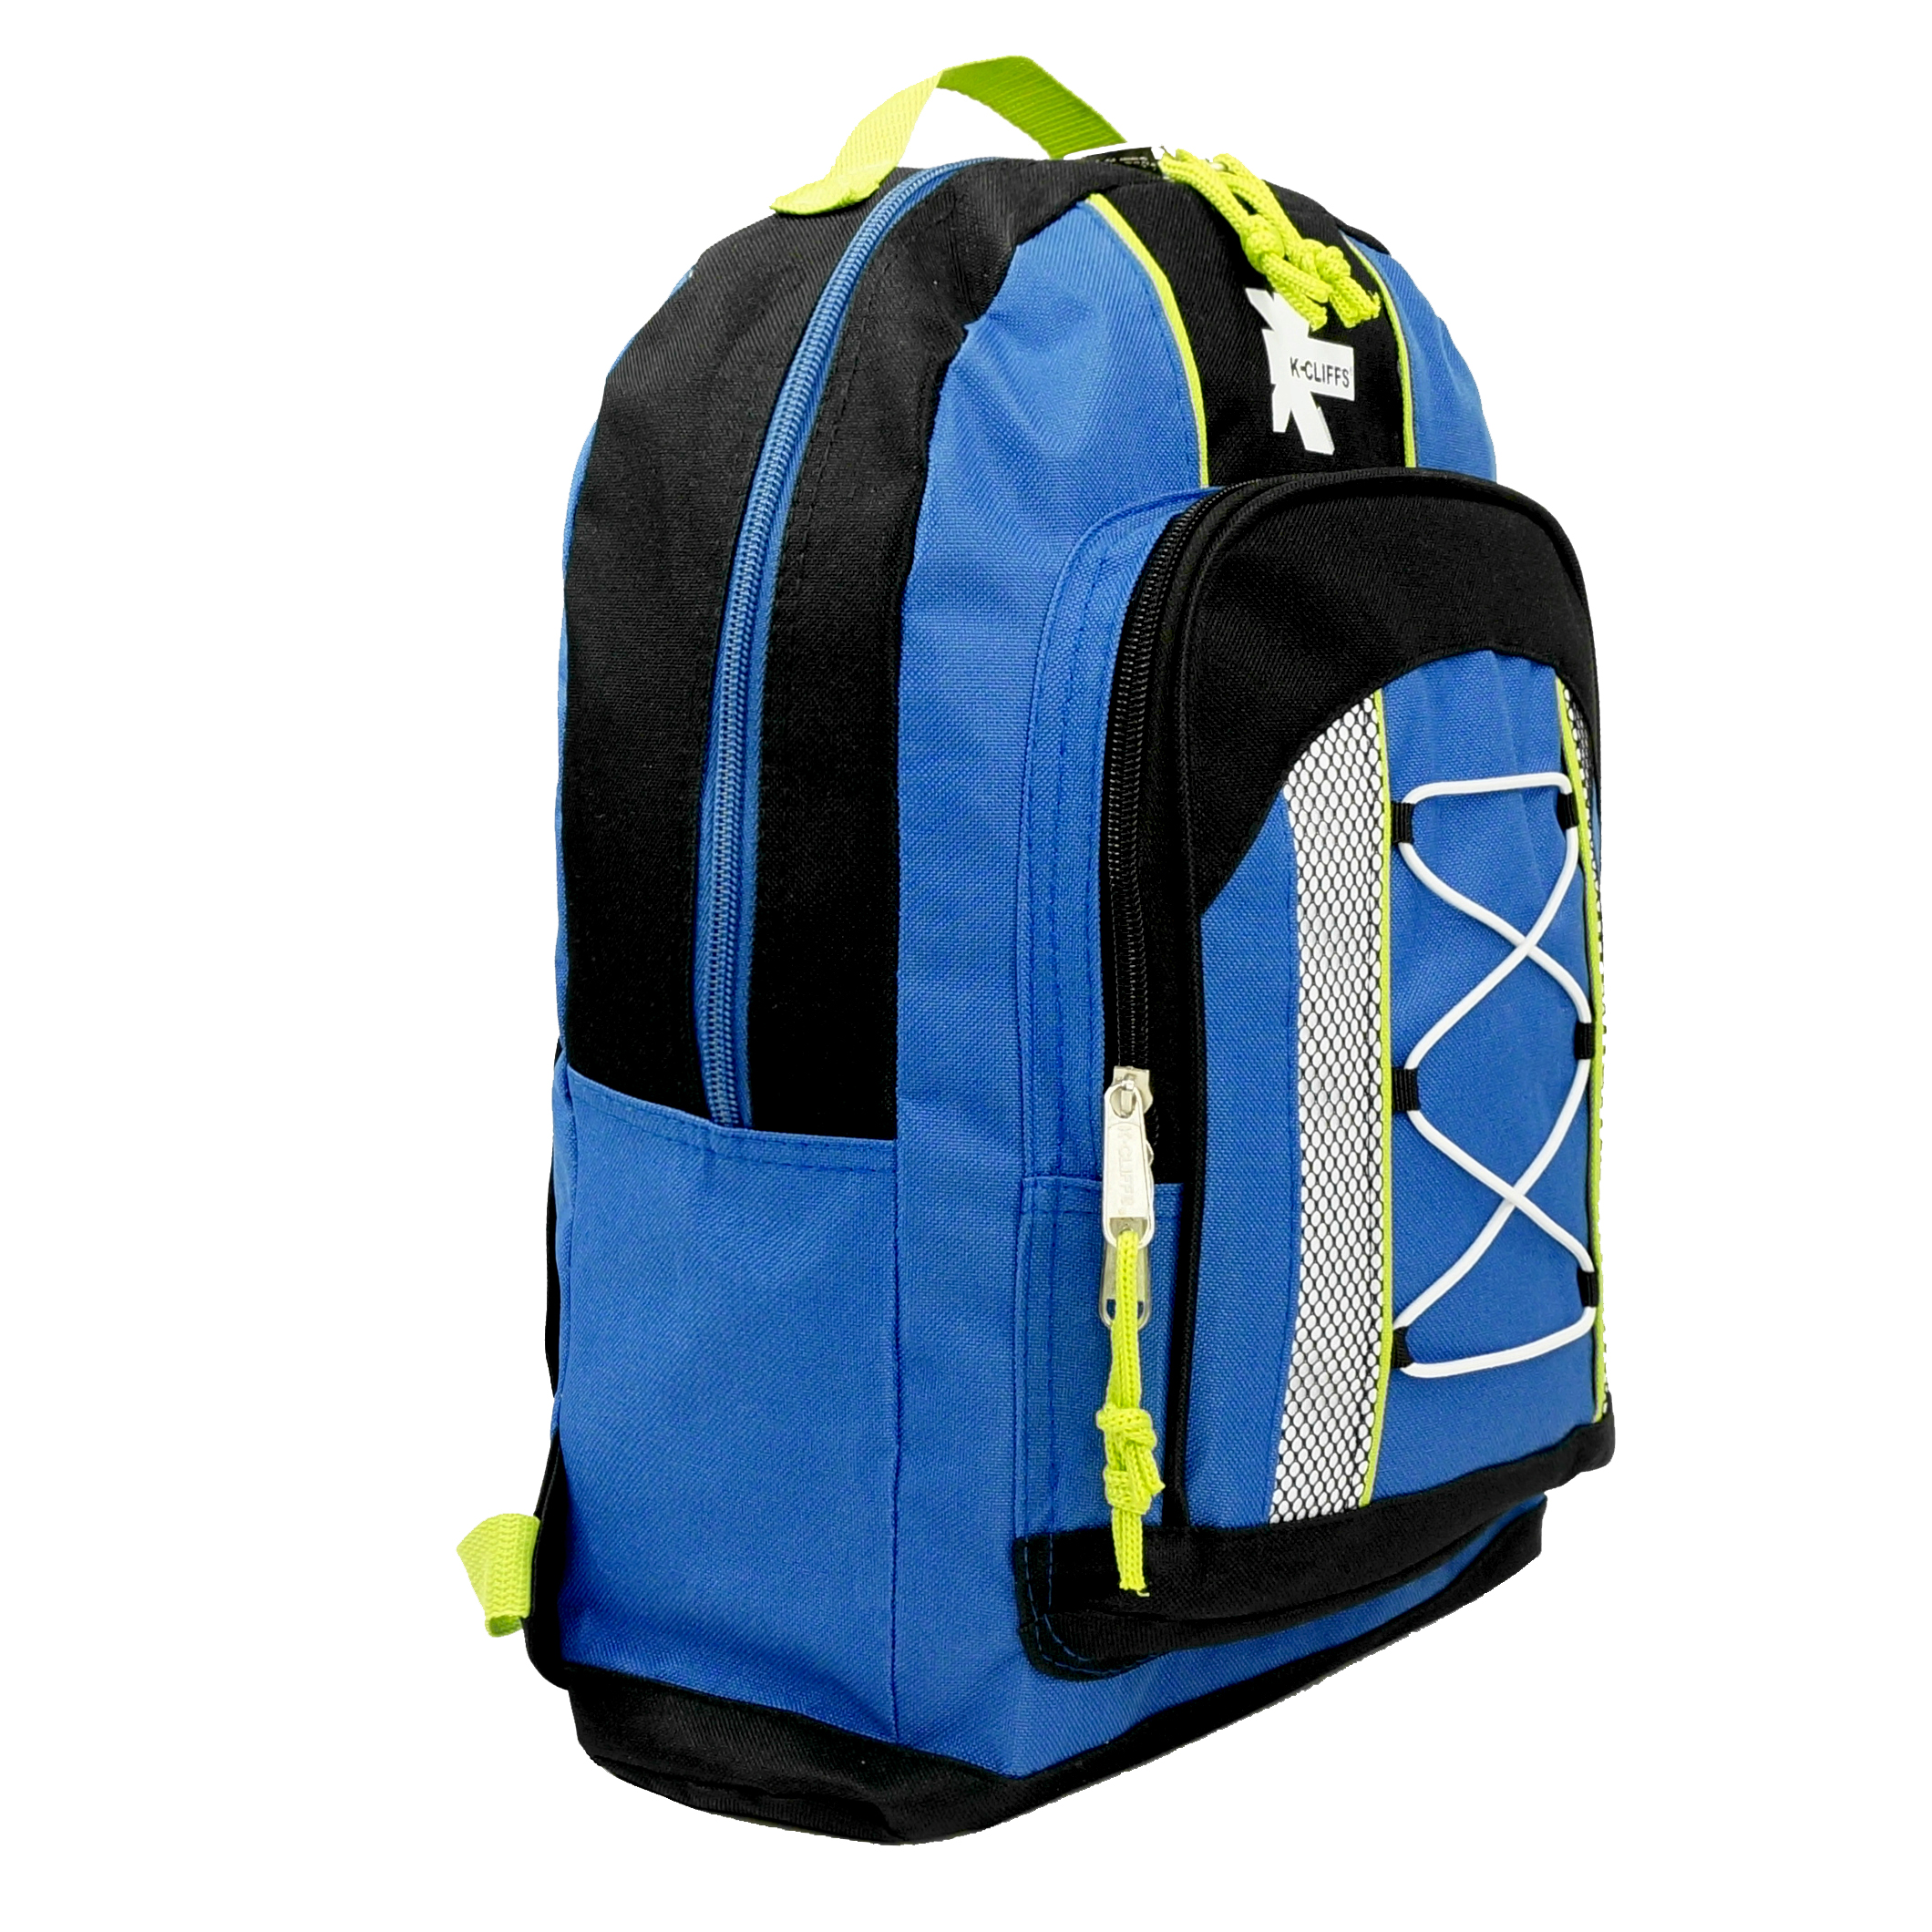 K-Cliffs 15" Lightweight Backpack, Daypack Bungee Water Resistant for Travel School and College, Unisex Color for Casual Everyday Kids & Teens (Blue) - image 3 of 6